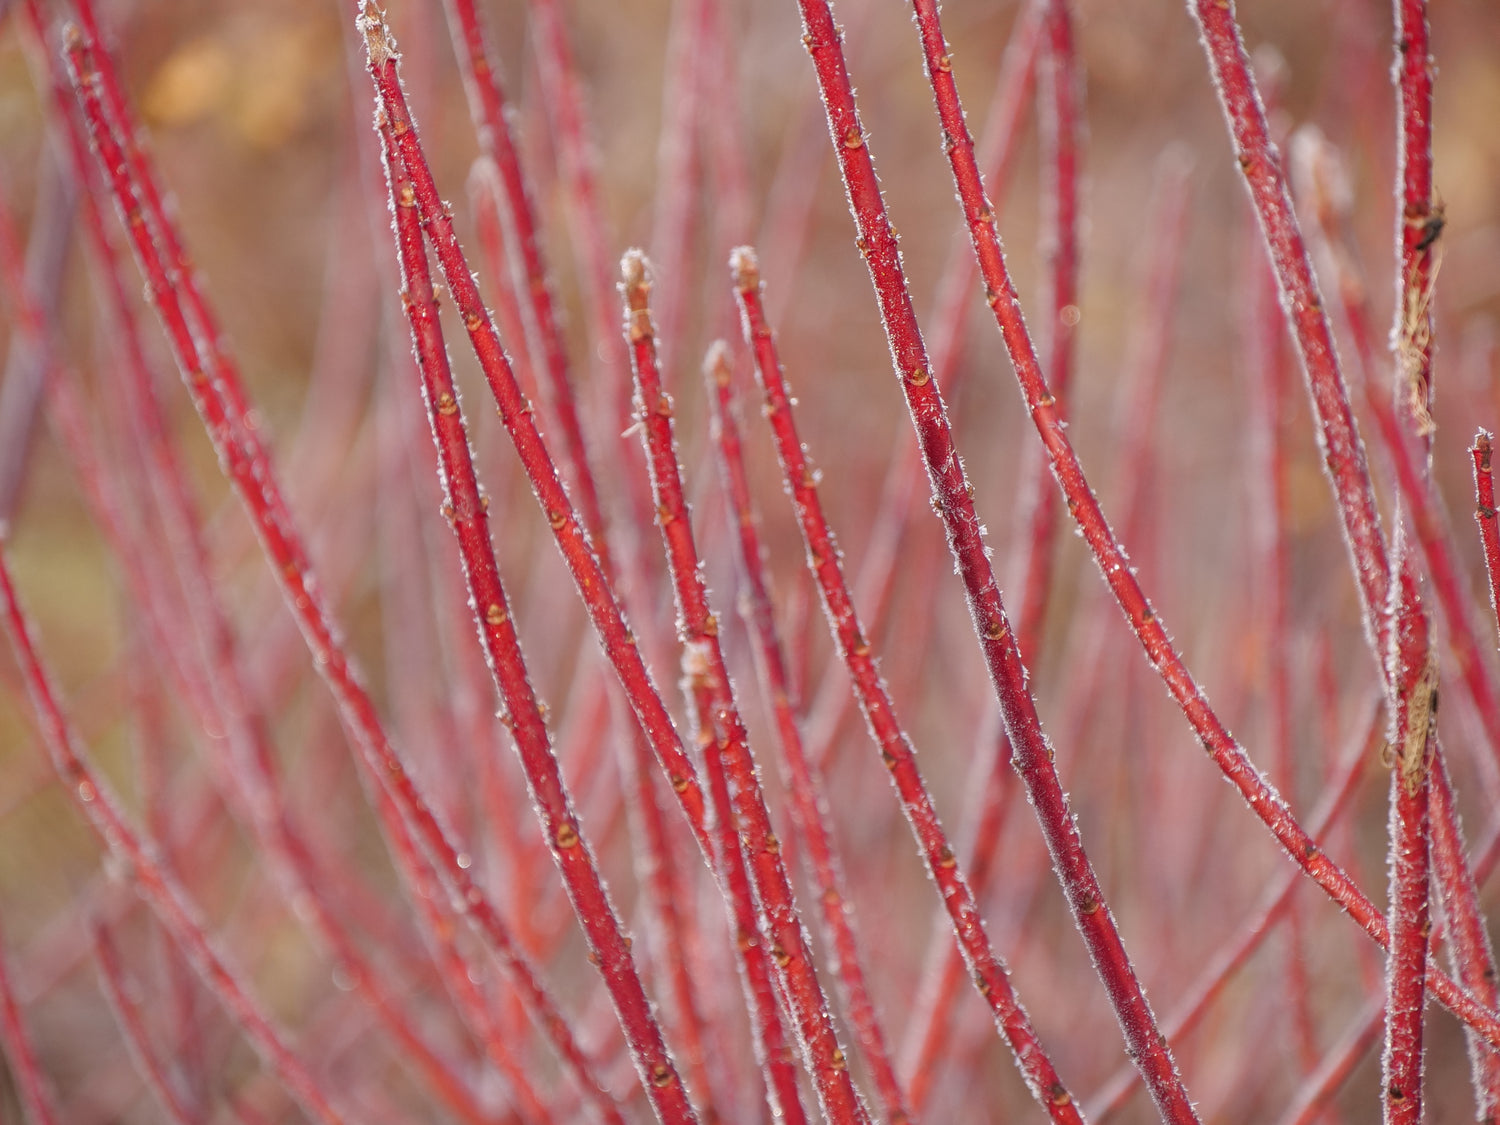 The stems of Arctic Fire red twig dogwood coated in shimmering frost